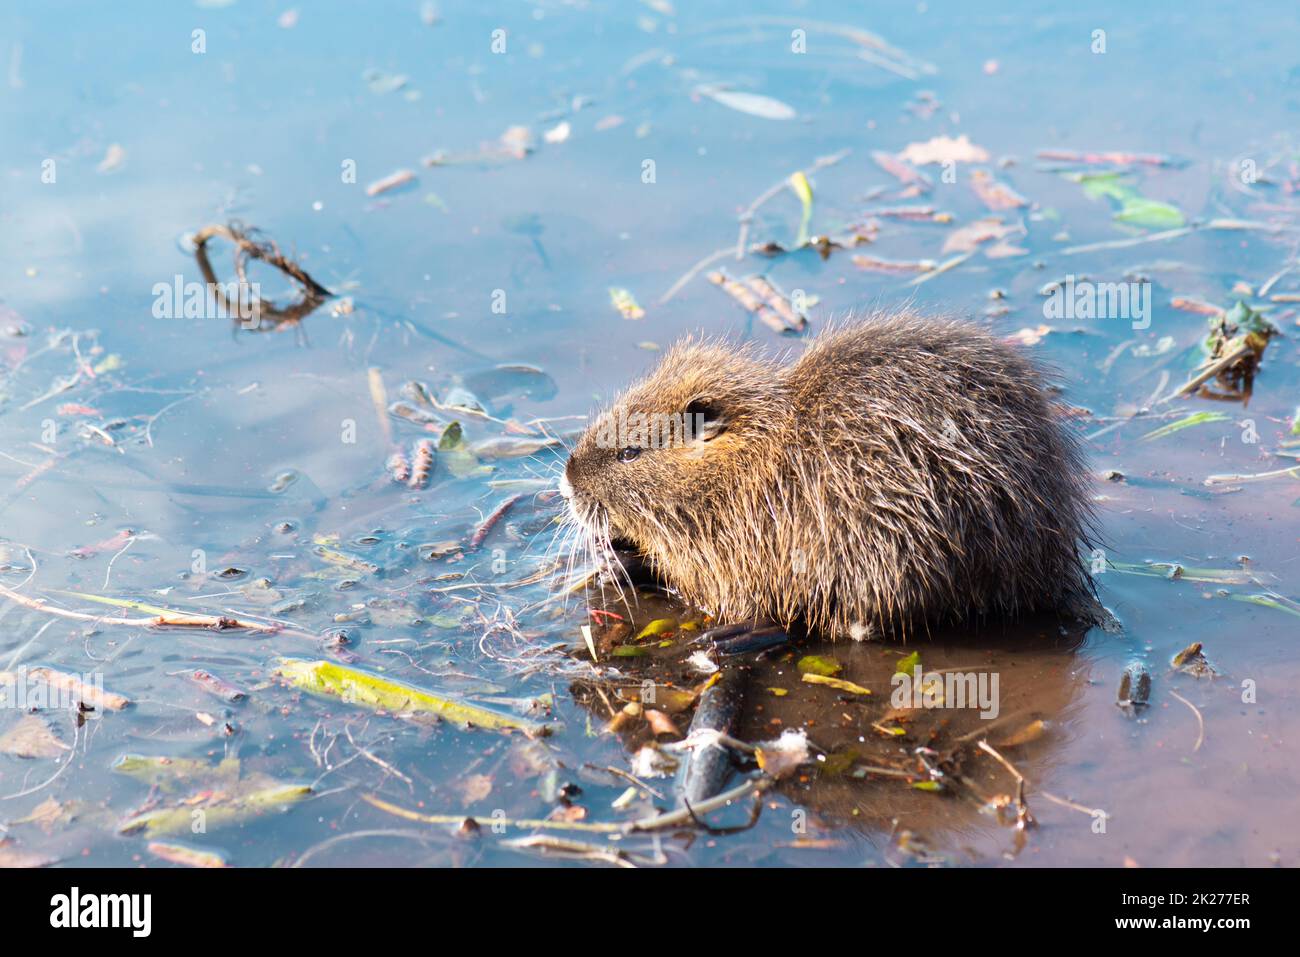 Nutria, coypu herbivorous, semiaquatic rodent member of the family Myocastoridae on the riverbed, baby animals, habintant wetlands, river rat Stock Photo